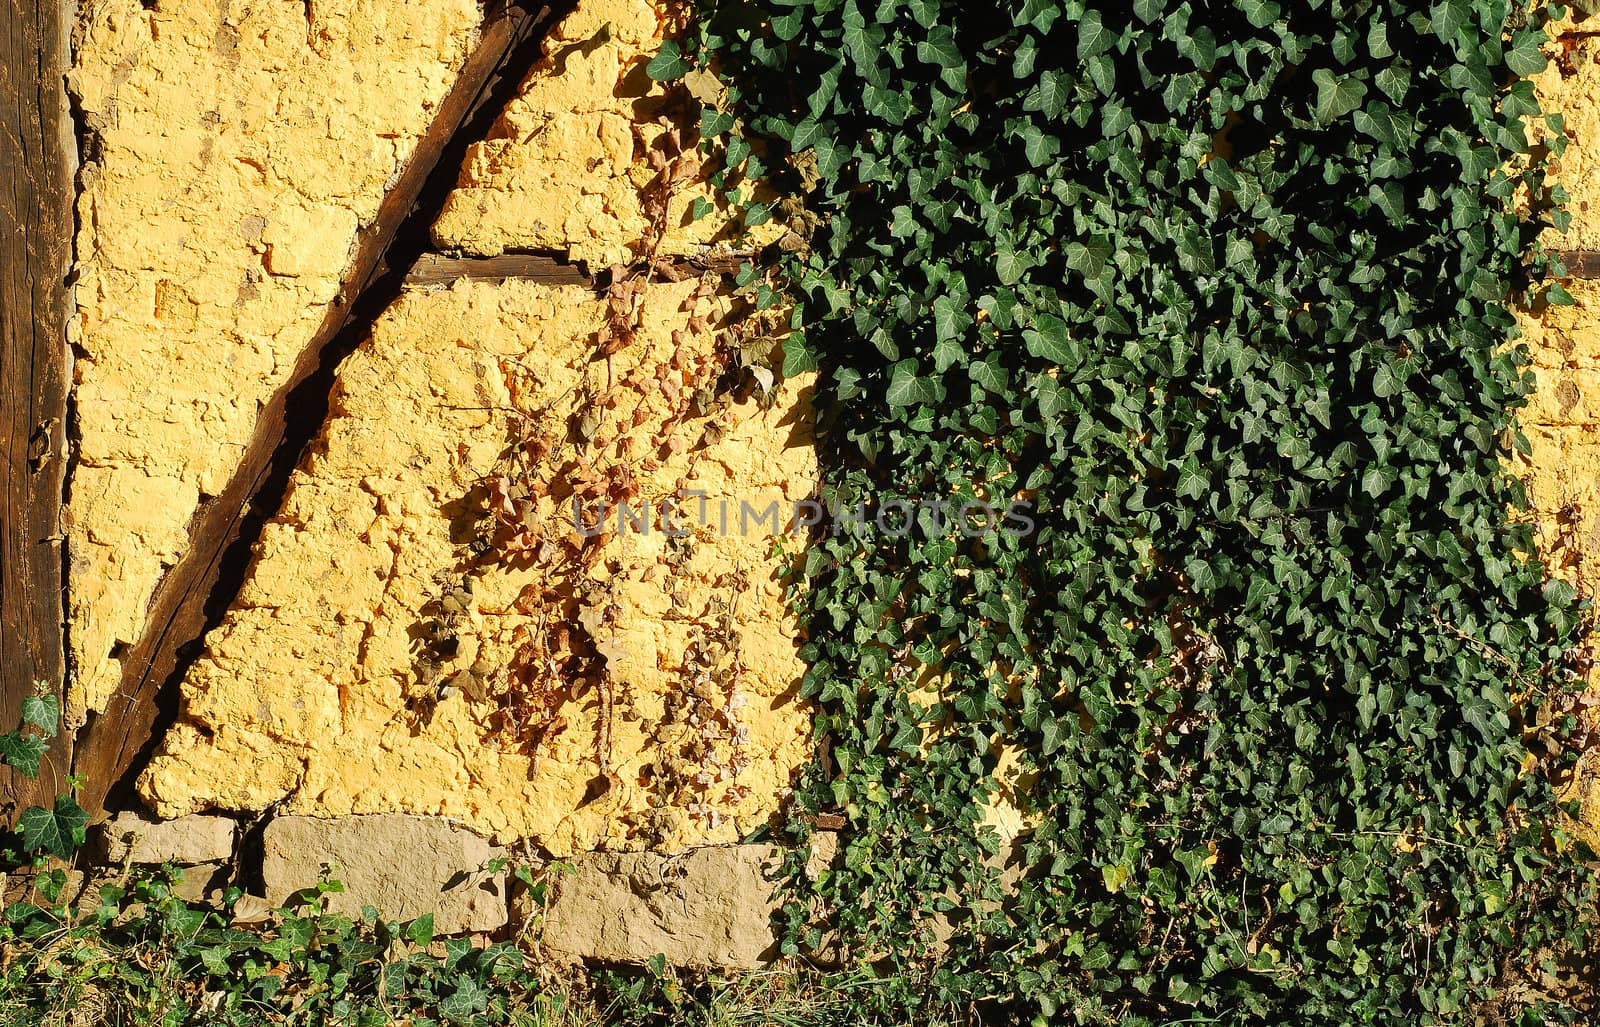 Adobe yellow frame-build wall green ivy as background